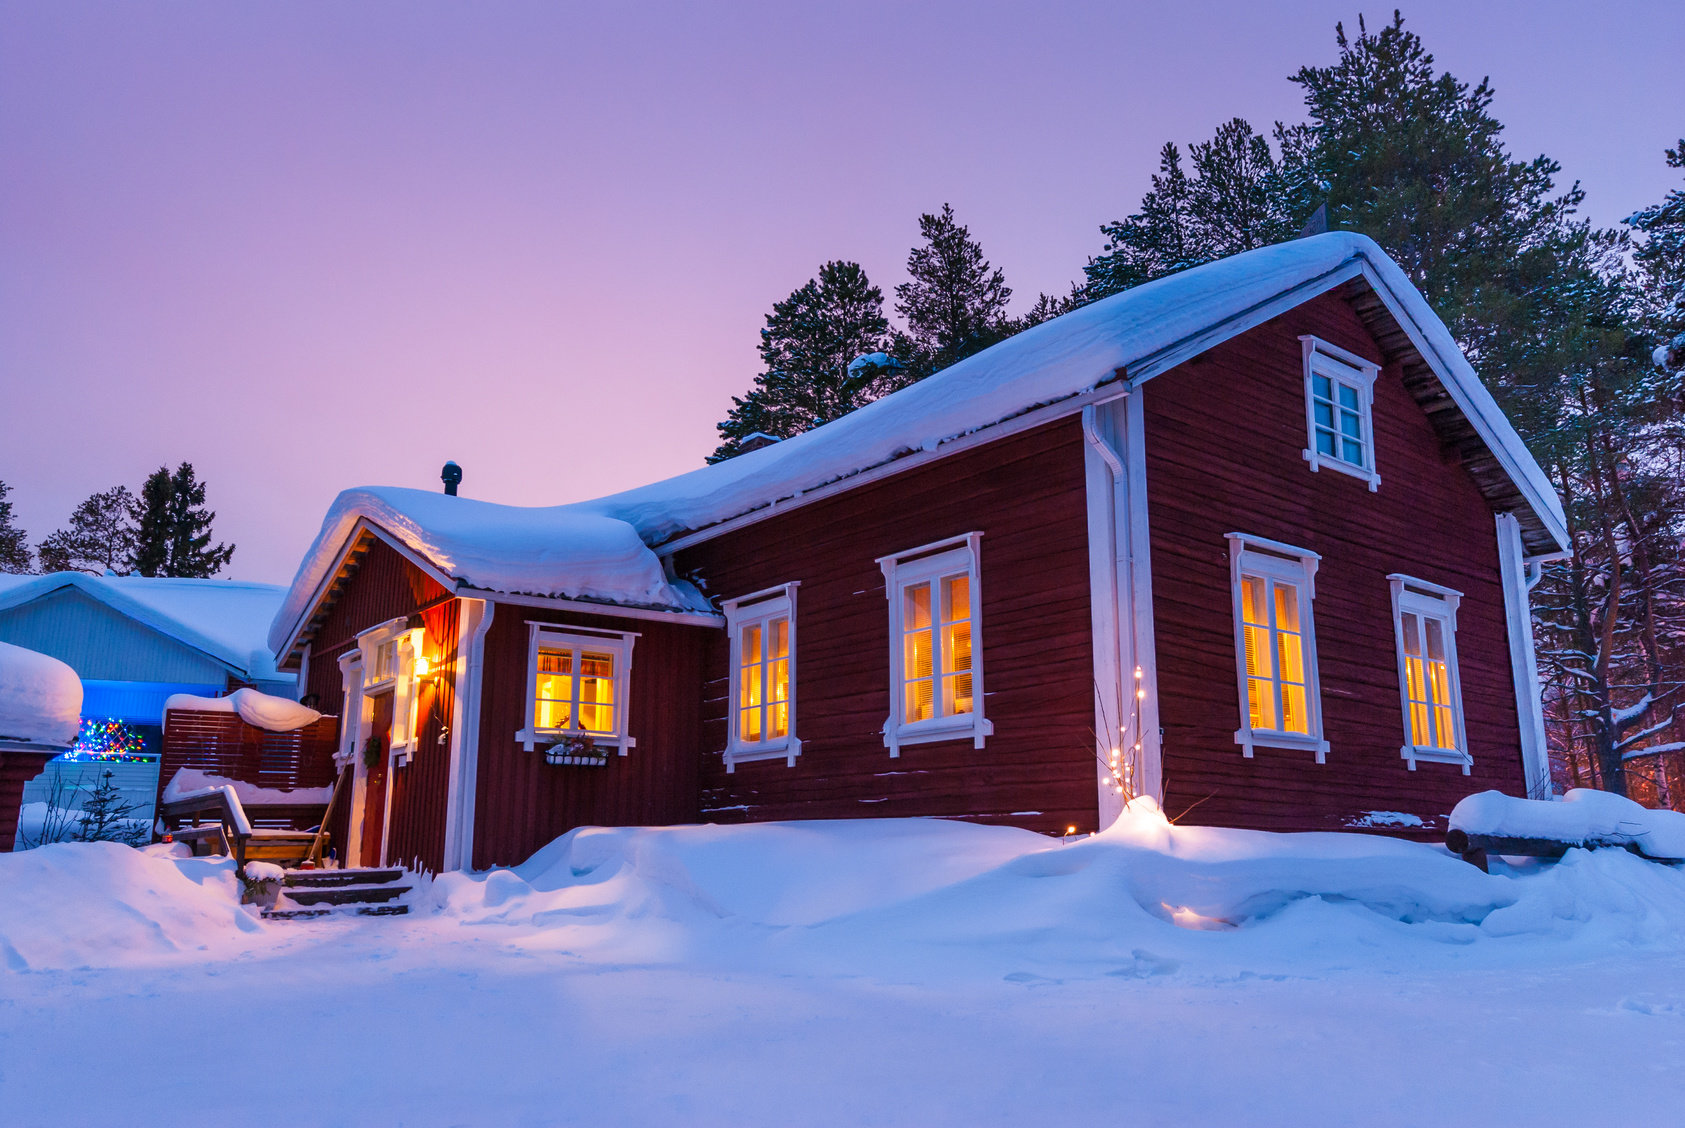 Winterizing Your Home: What You Can Do